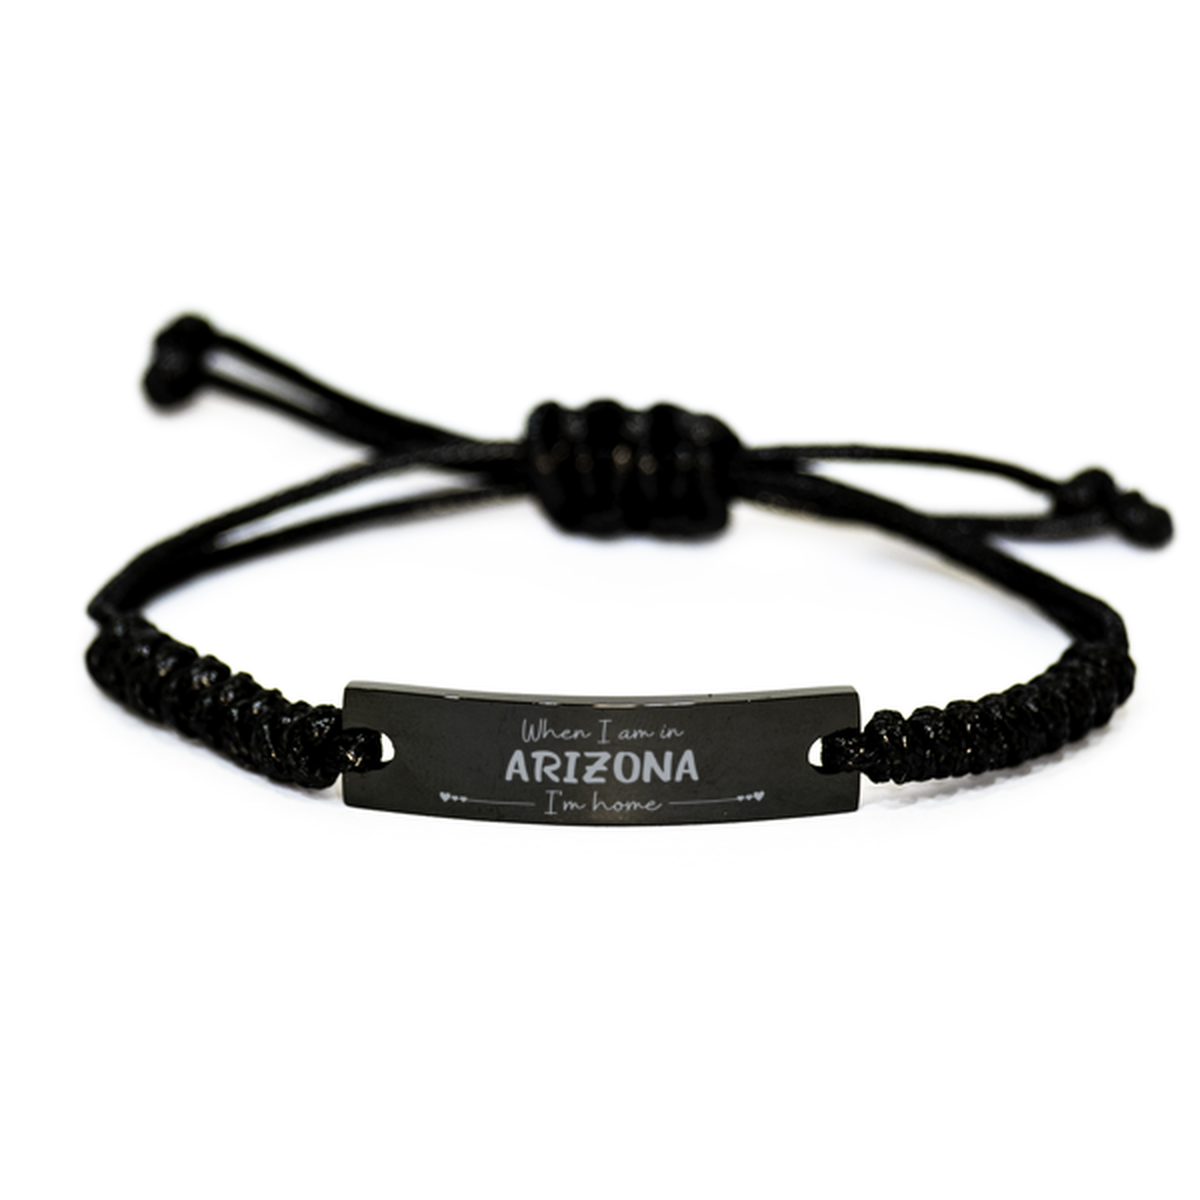 When I am in Arizona I'm home Black Rope Bracelet, Cheap Gifts For Arizona, State Arizona Birthday Gifts for Friends Coworker